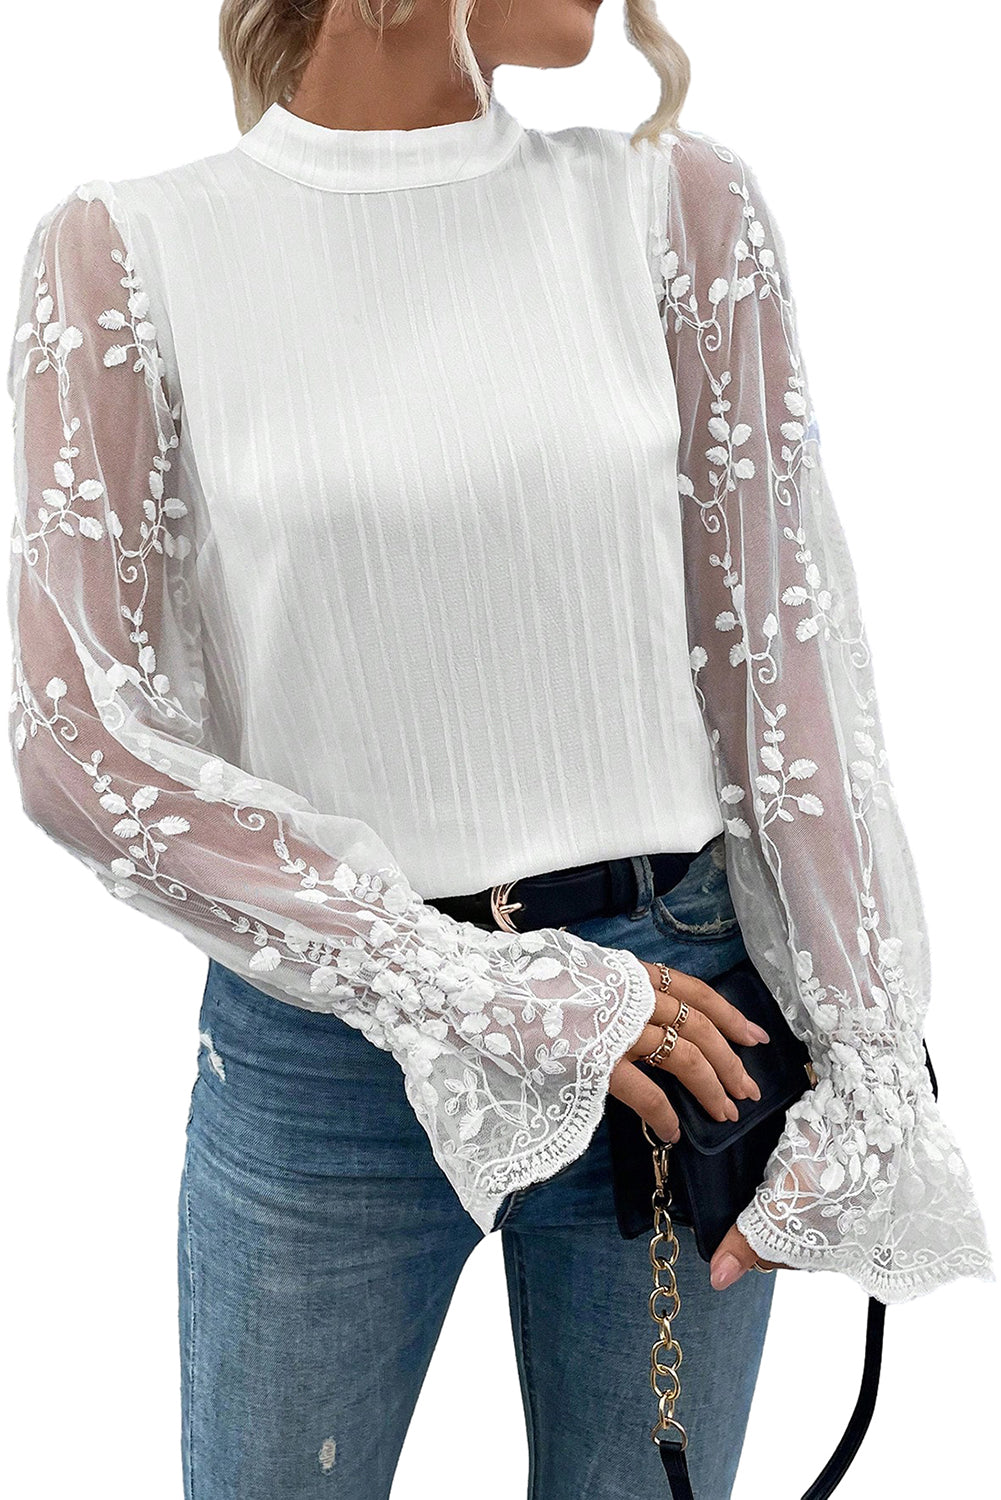 Apricot Pink Textured Contrast Lace Sleeve Mock Neck Blouse